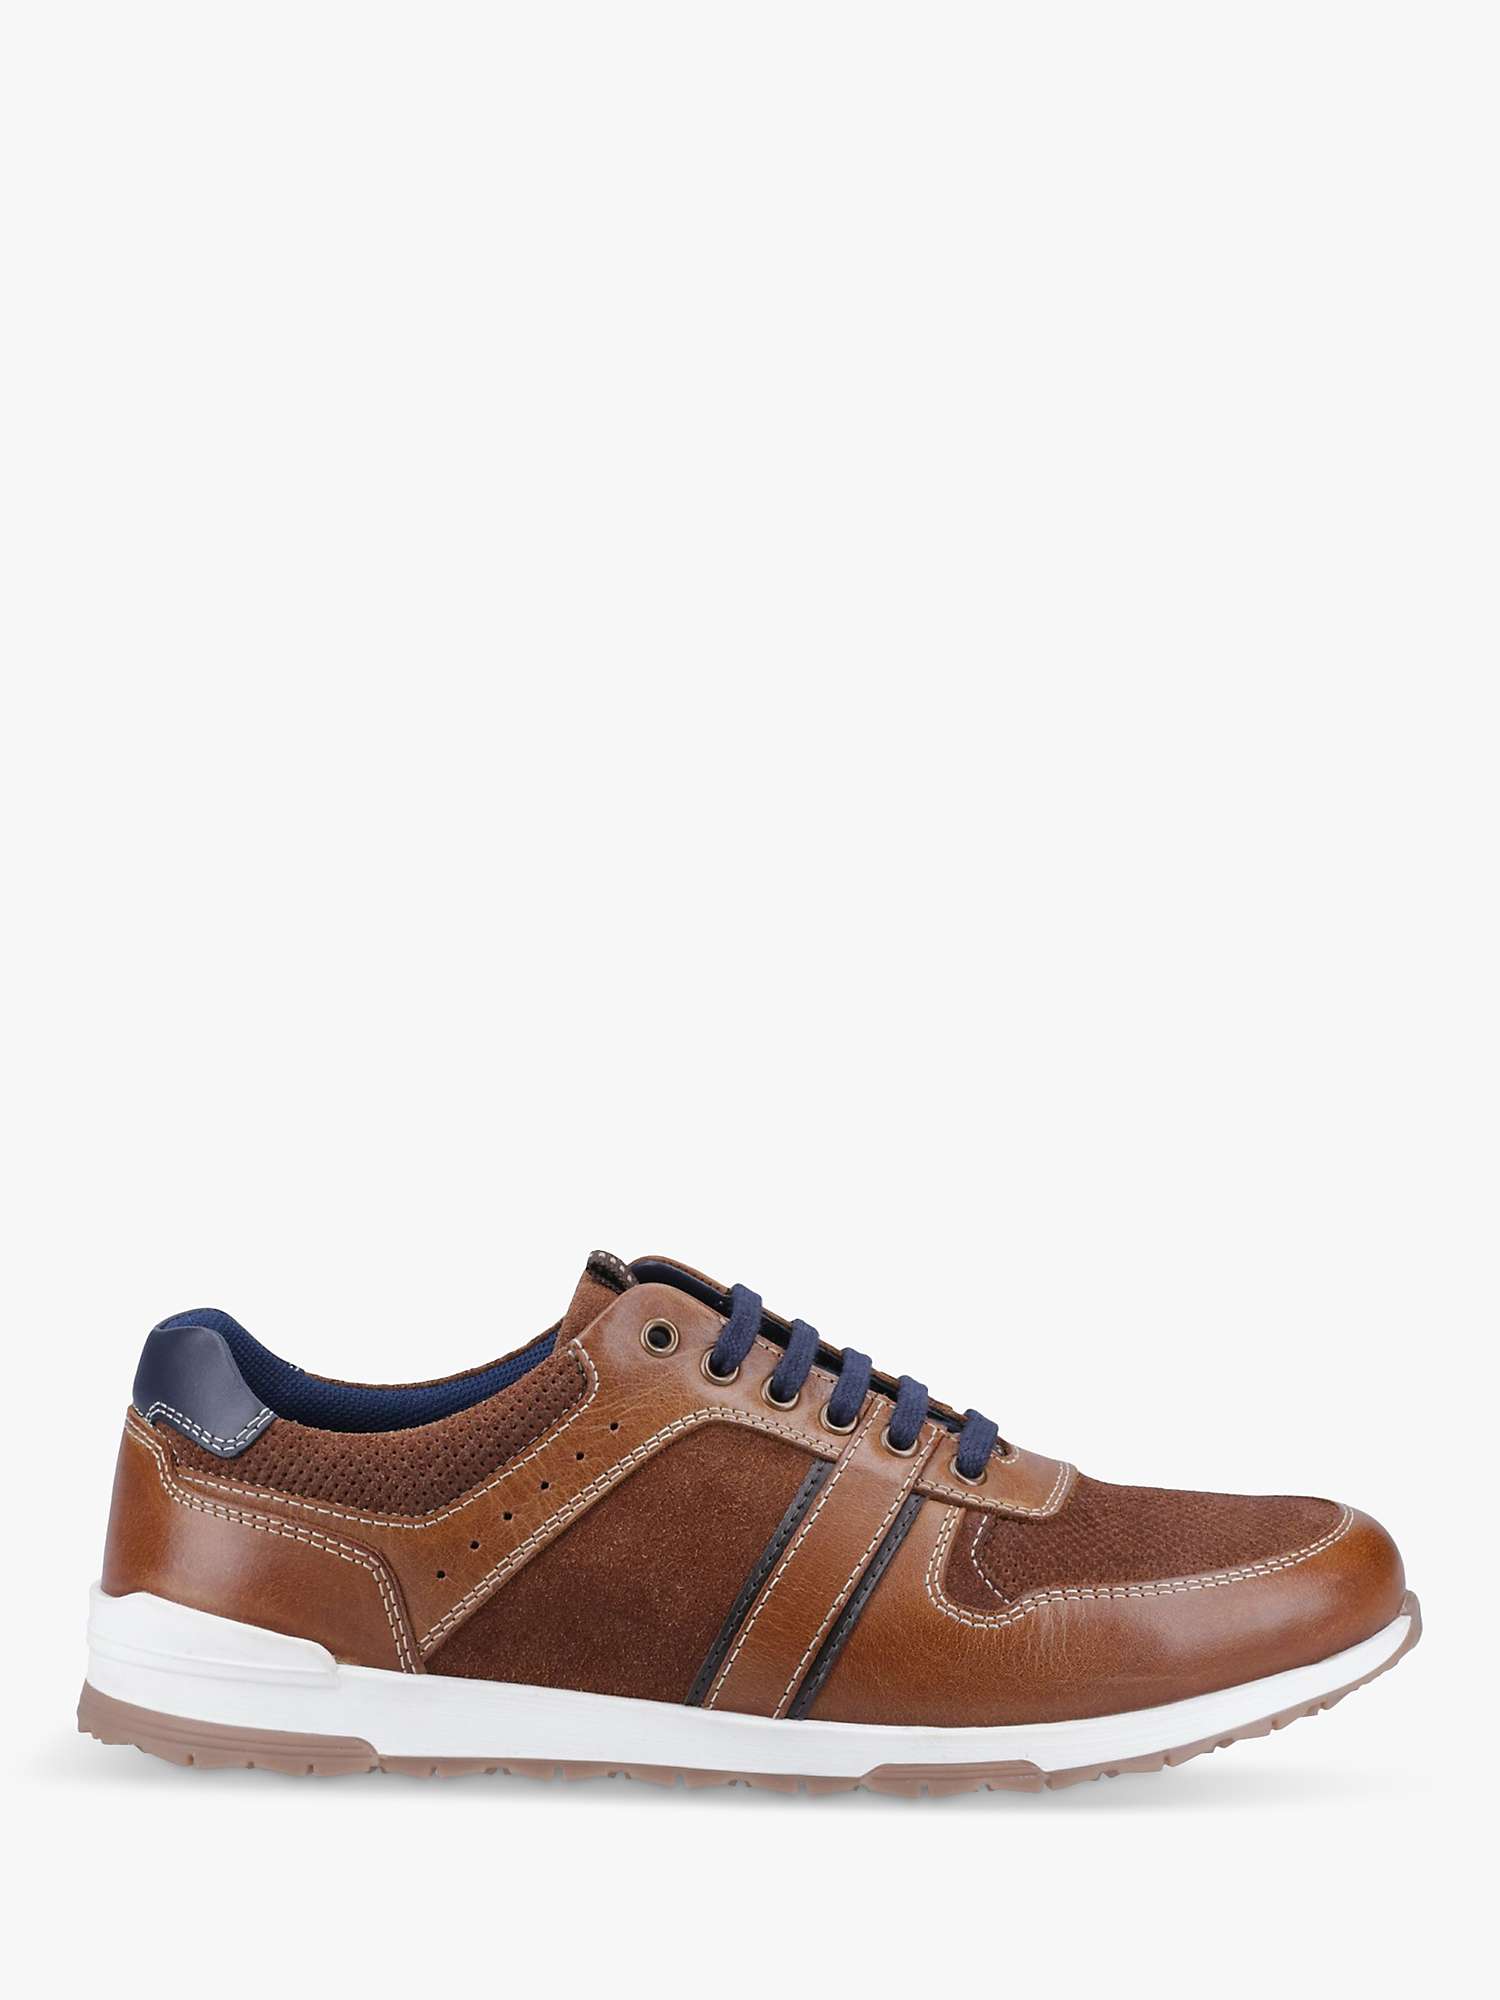 Buy Hush Puppies Christopher Leather Trainers, Tan Online at johnlewis.com